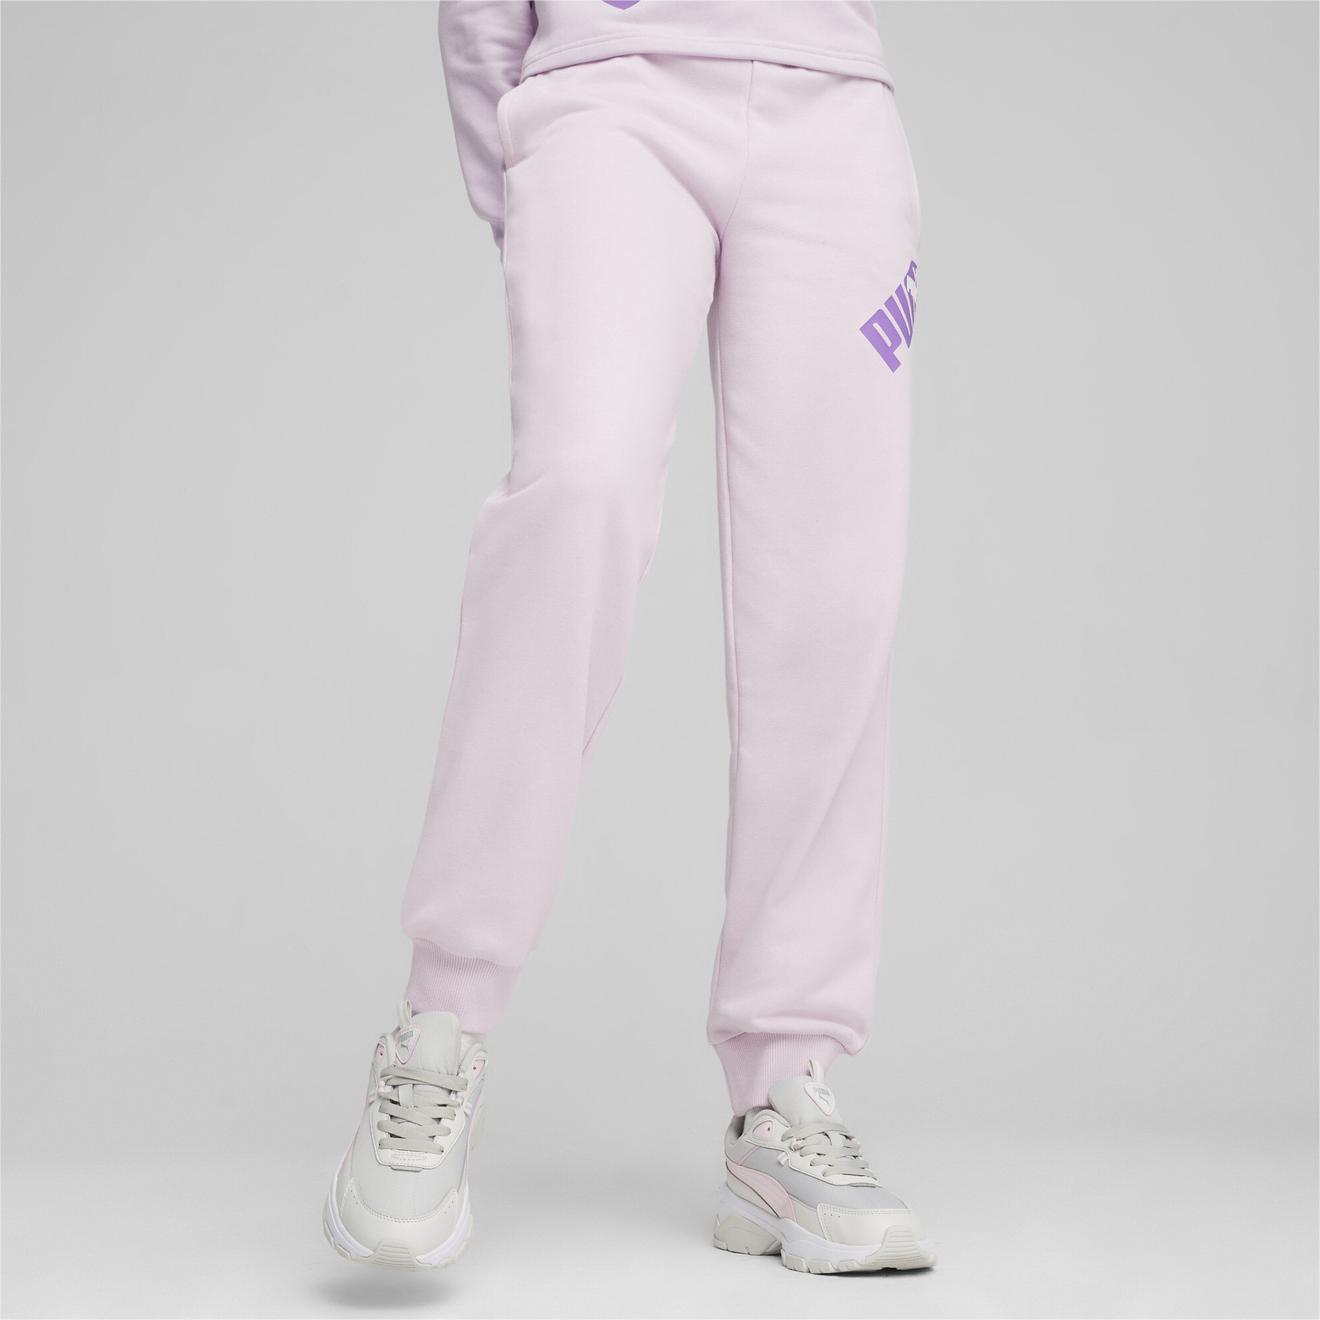 PUMA POWER Women's Pants offers at 199 Dhs in Puma